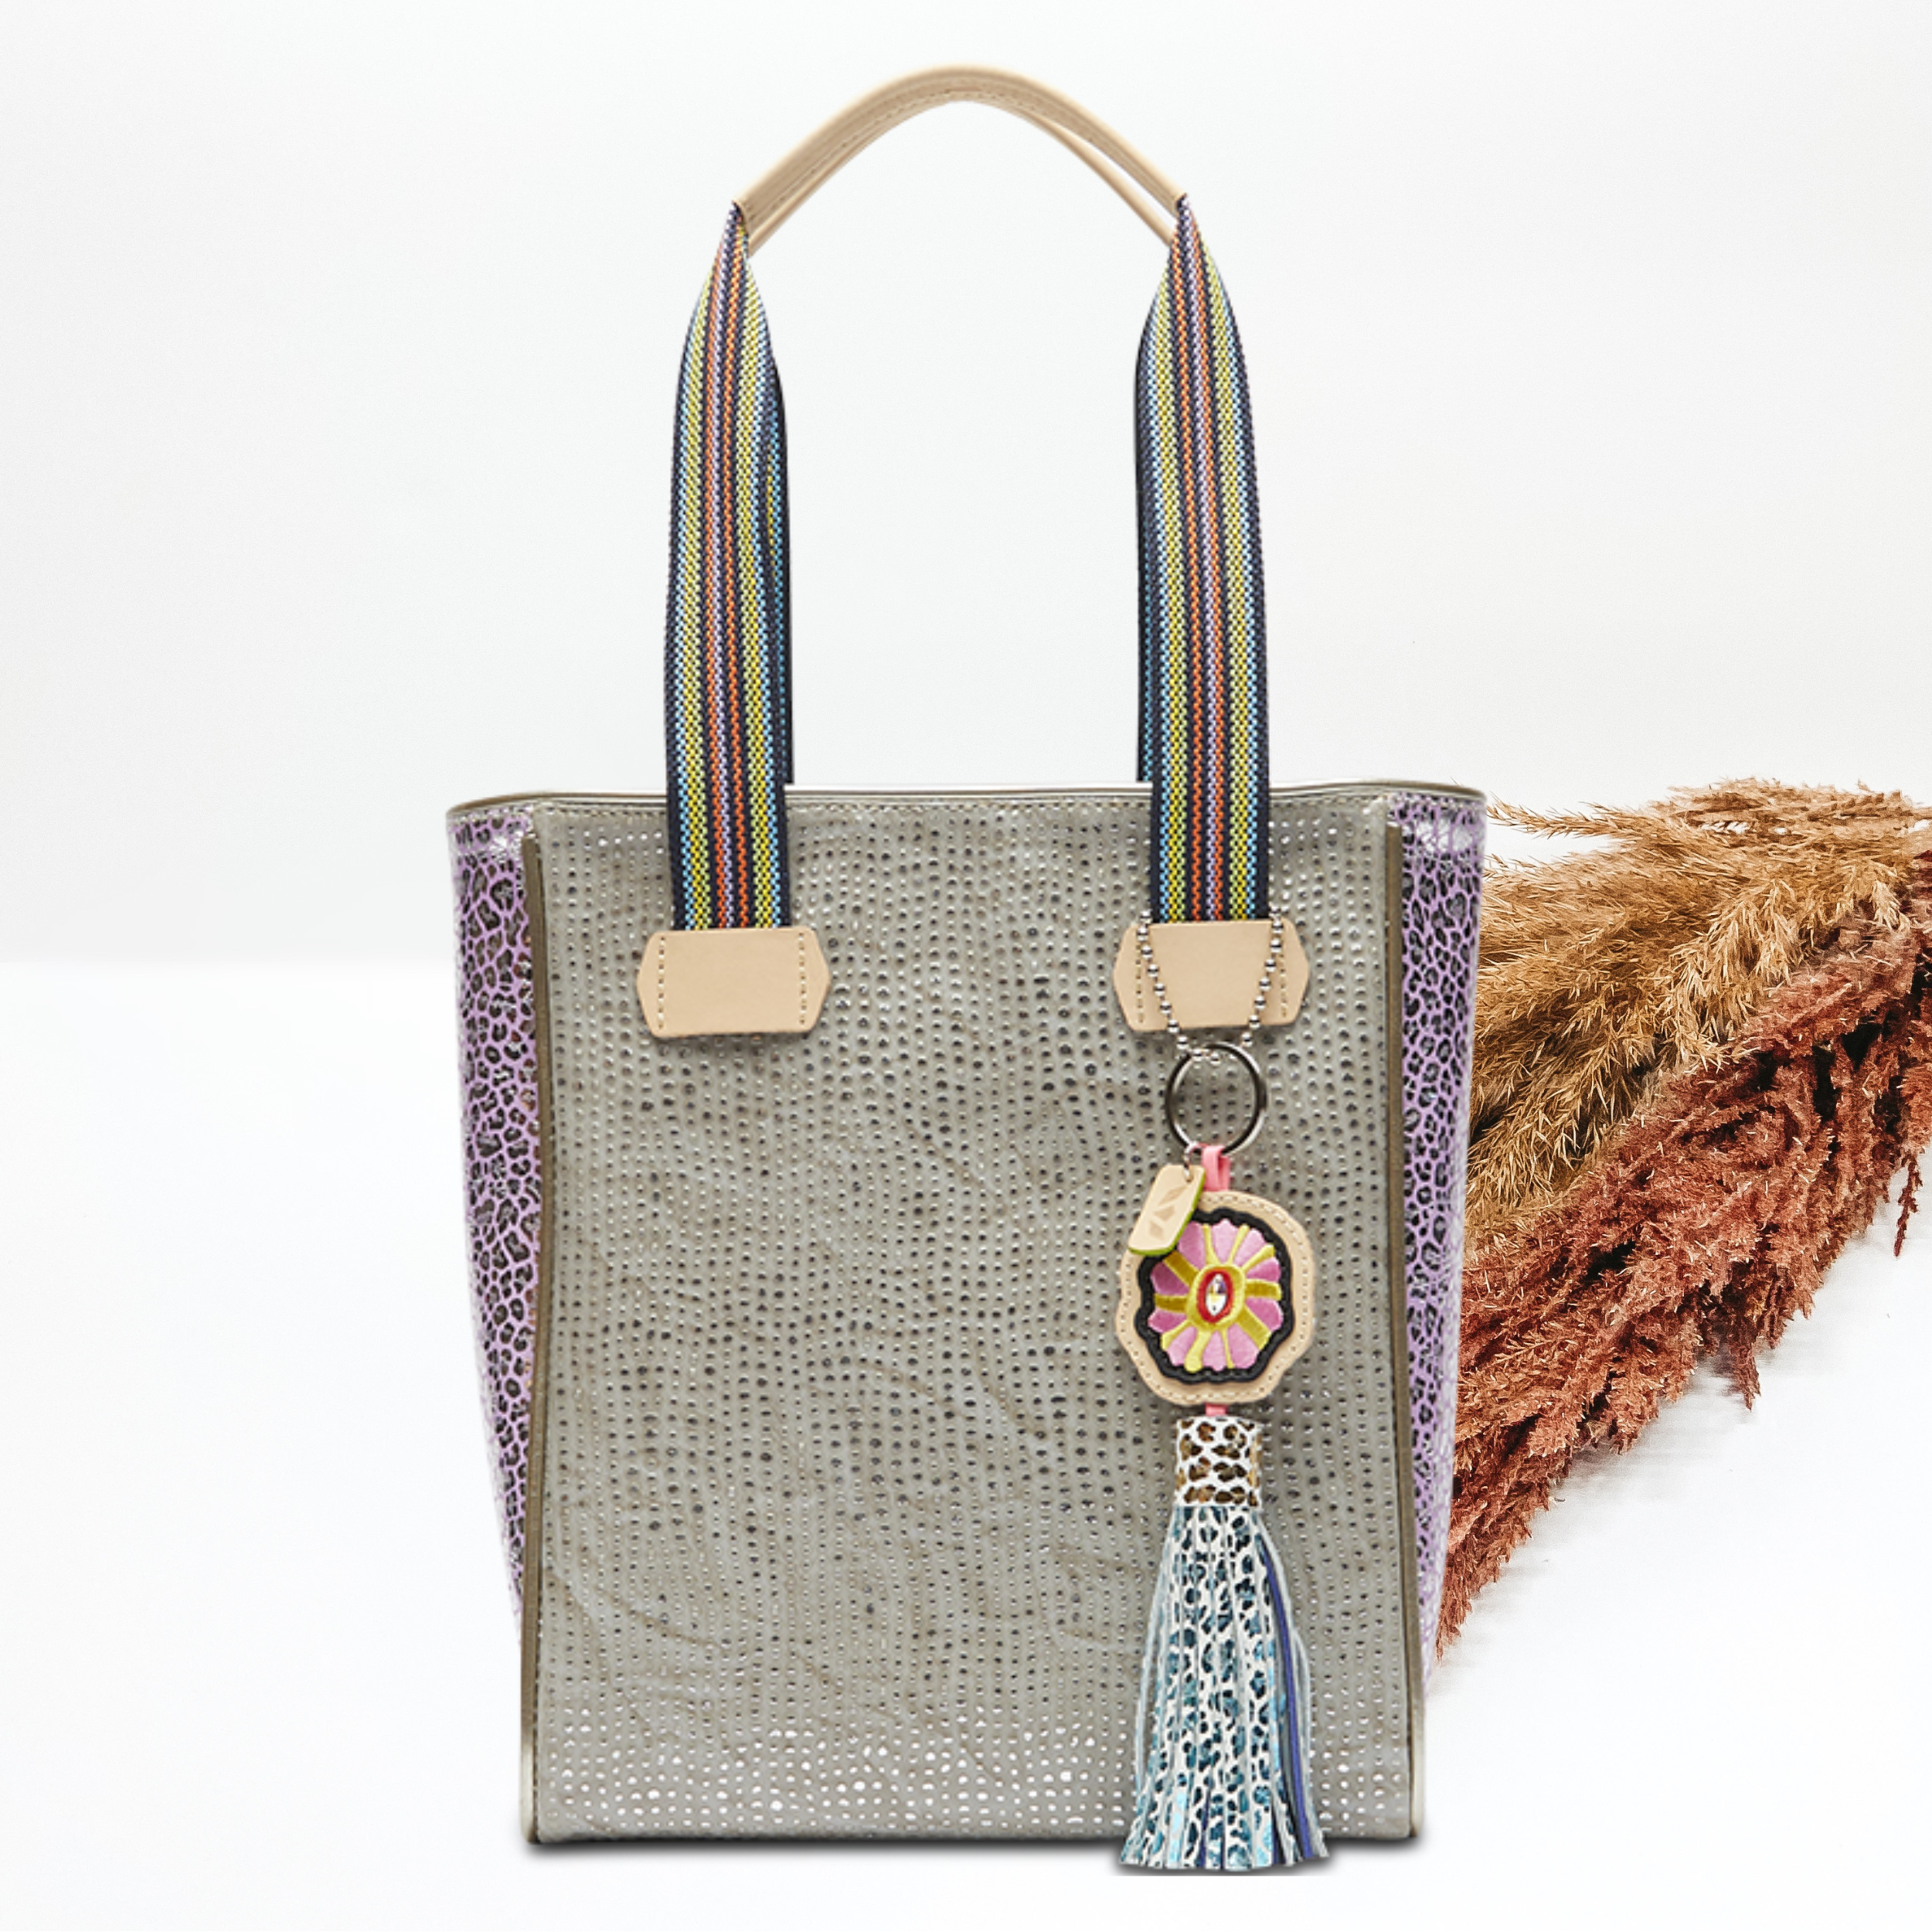 Pictured on a white background is a grey chica tote bag with woven straps and light tan handles. This bag includes a silver dotted print, purple leopard side panels, and a multicolored tassel charm. 